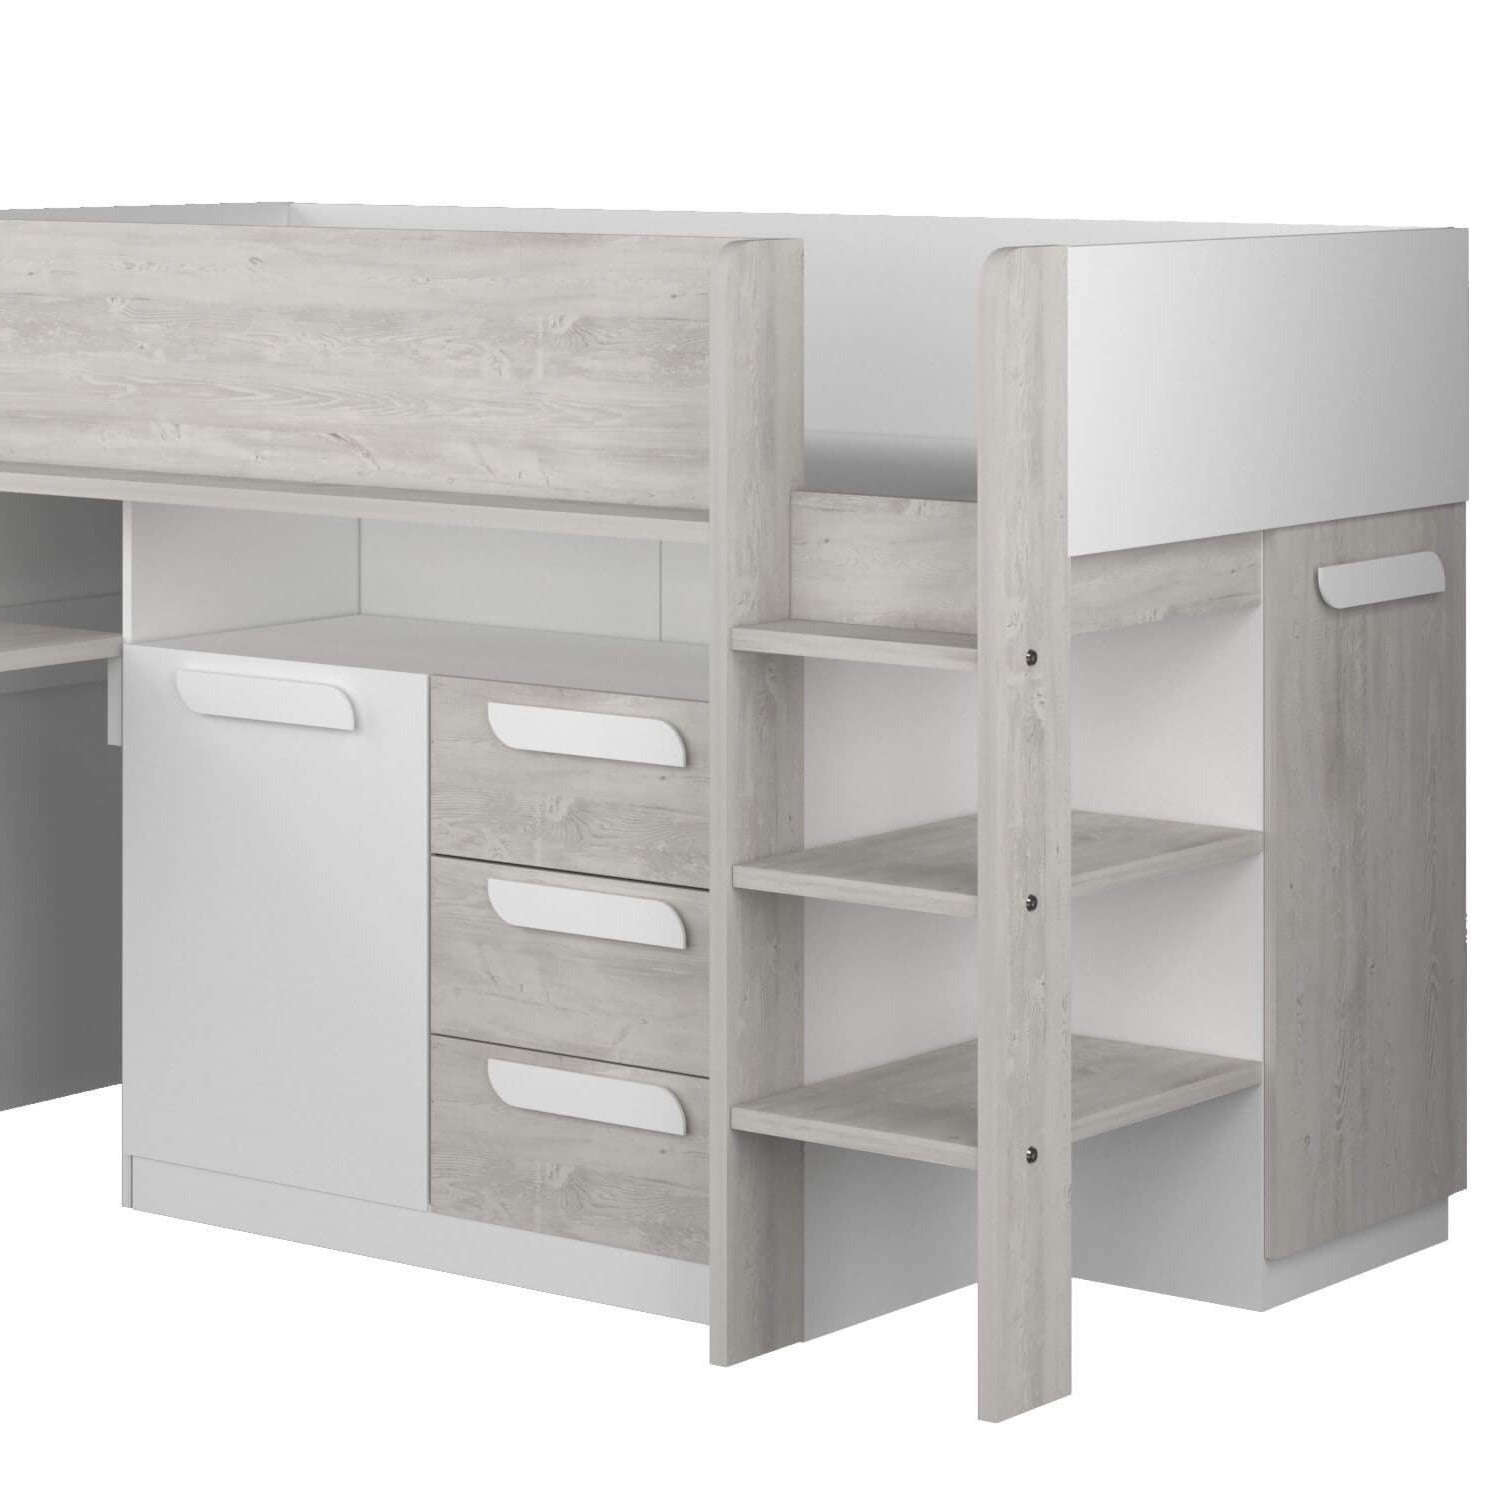 Girona Mid Sleeper Bed with Pull Out Desk Cupboard & Drawers In White Cut Out